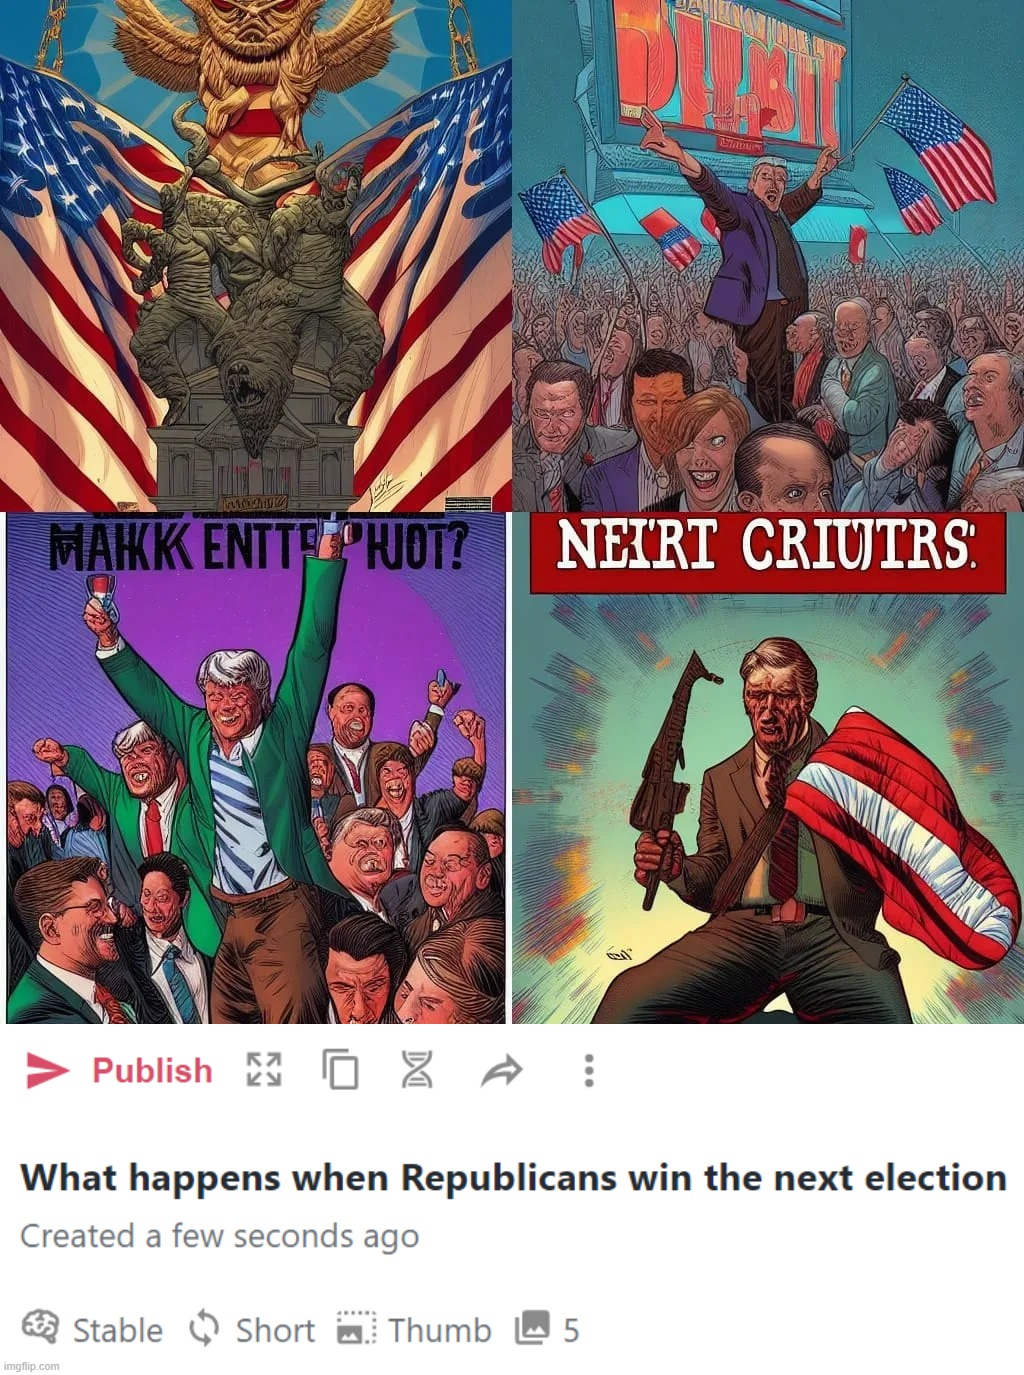 Feels accurate | image tagged in what happens when republicans win the next election,republicans,election,midterms,2022,vote | made w/ Imgflip meme maker